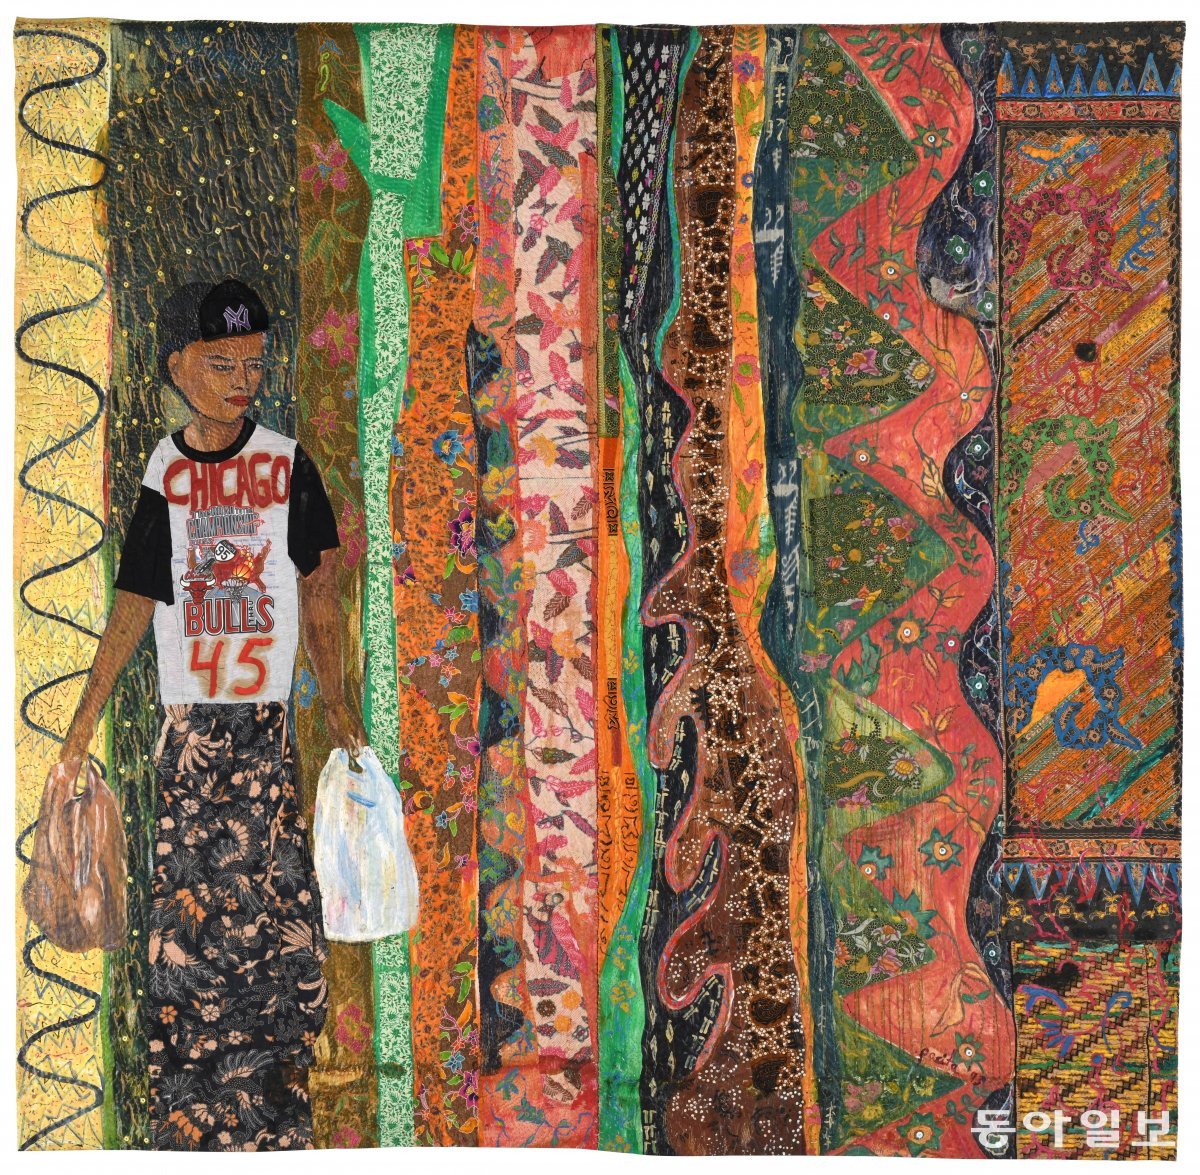 Pacita Abad (Basco, Philippines, 1946 – 2005)You Have to Blend in before You Stand Out (1995)Oil, painted batik cloth, sequins, buttons on stitched and padded canvas294.6 x 297.2 cmImage courtesy of Pacita Abad Art Estate / Photo by Peter Lee